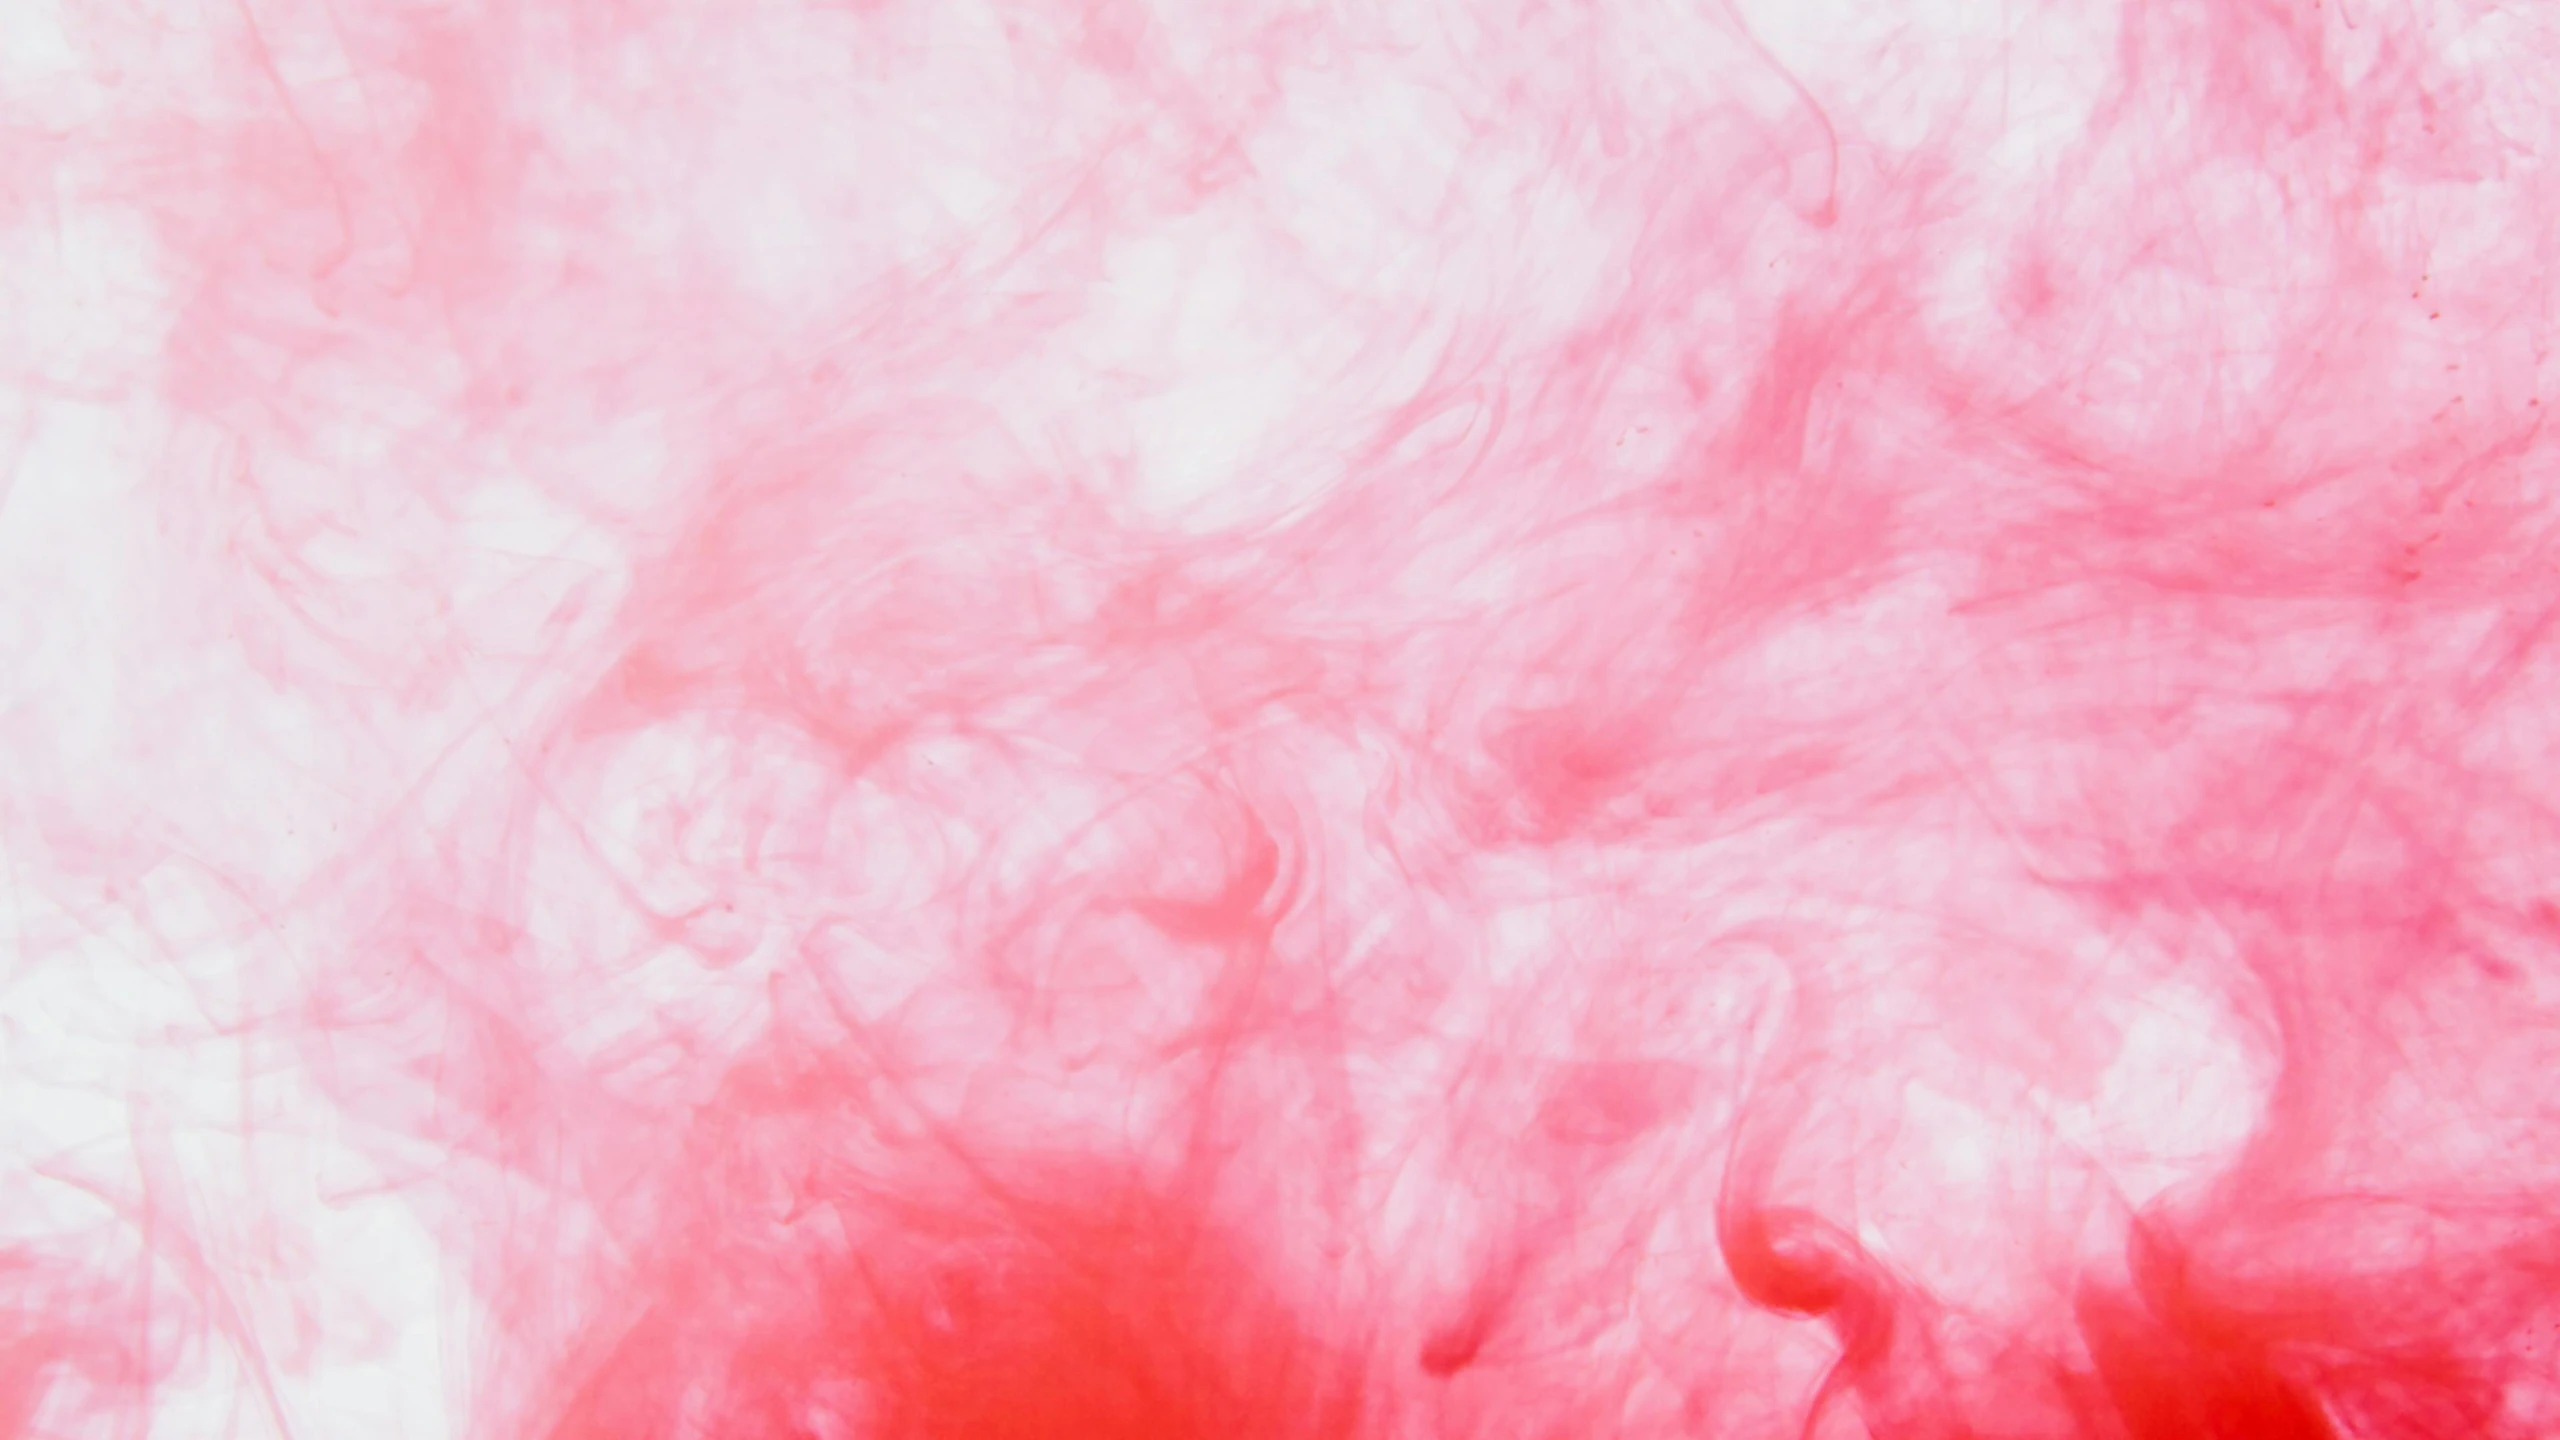 a red fire hydrant sitting on top of a lush green field, inspired by Anna Füssli, pexels, abstract expressionism, pink smoke, paper marbling, red-fabric, light pink